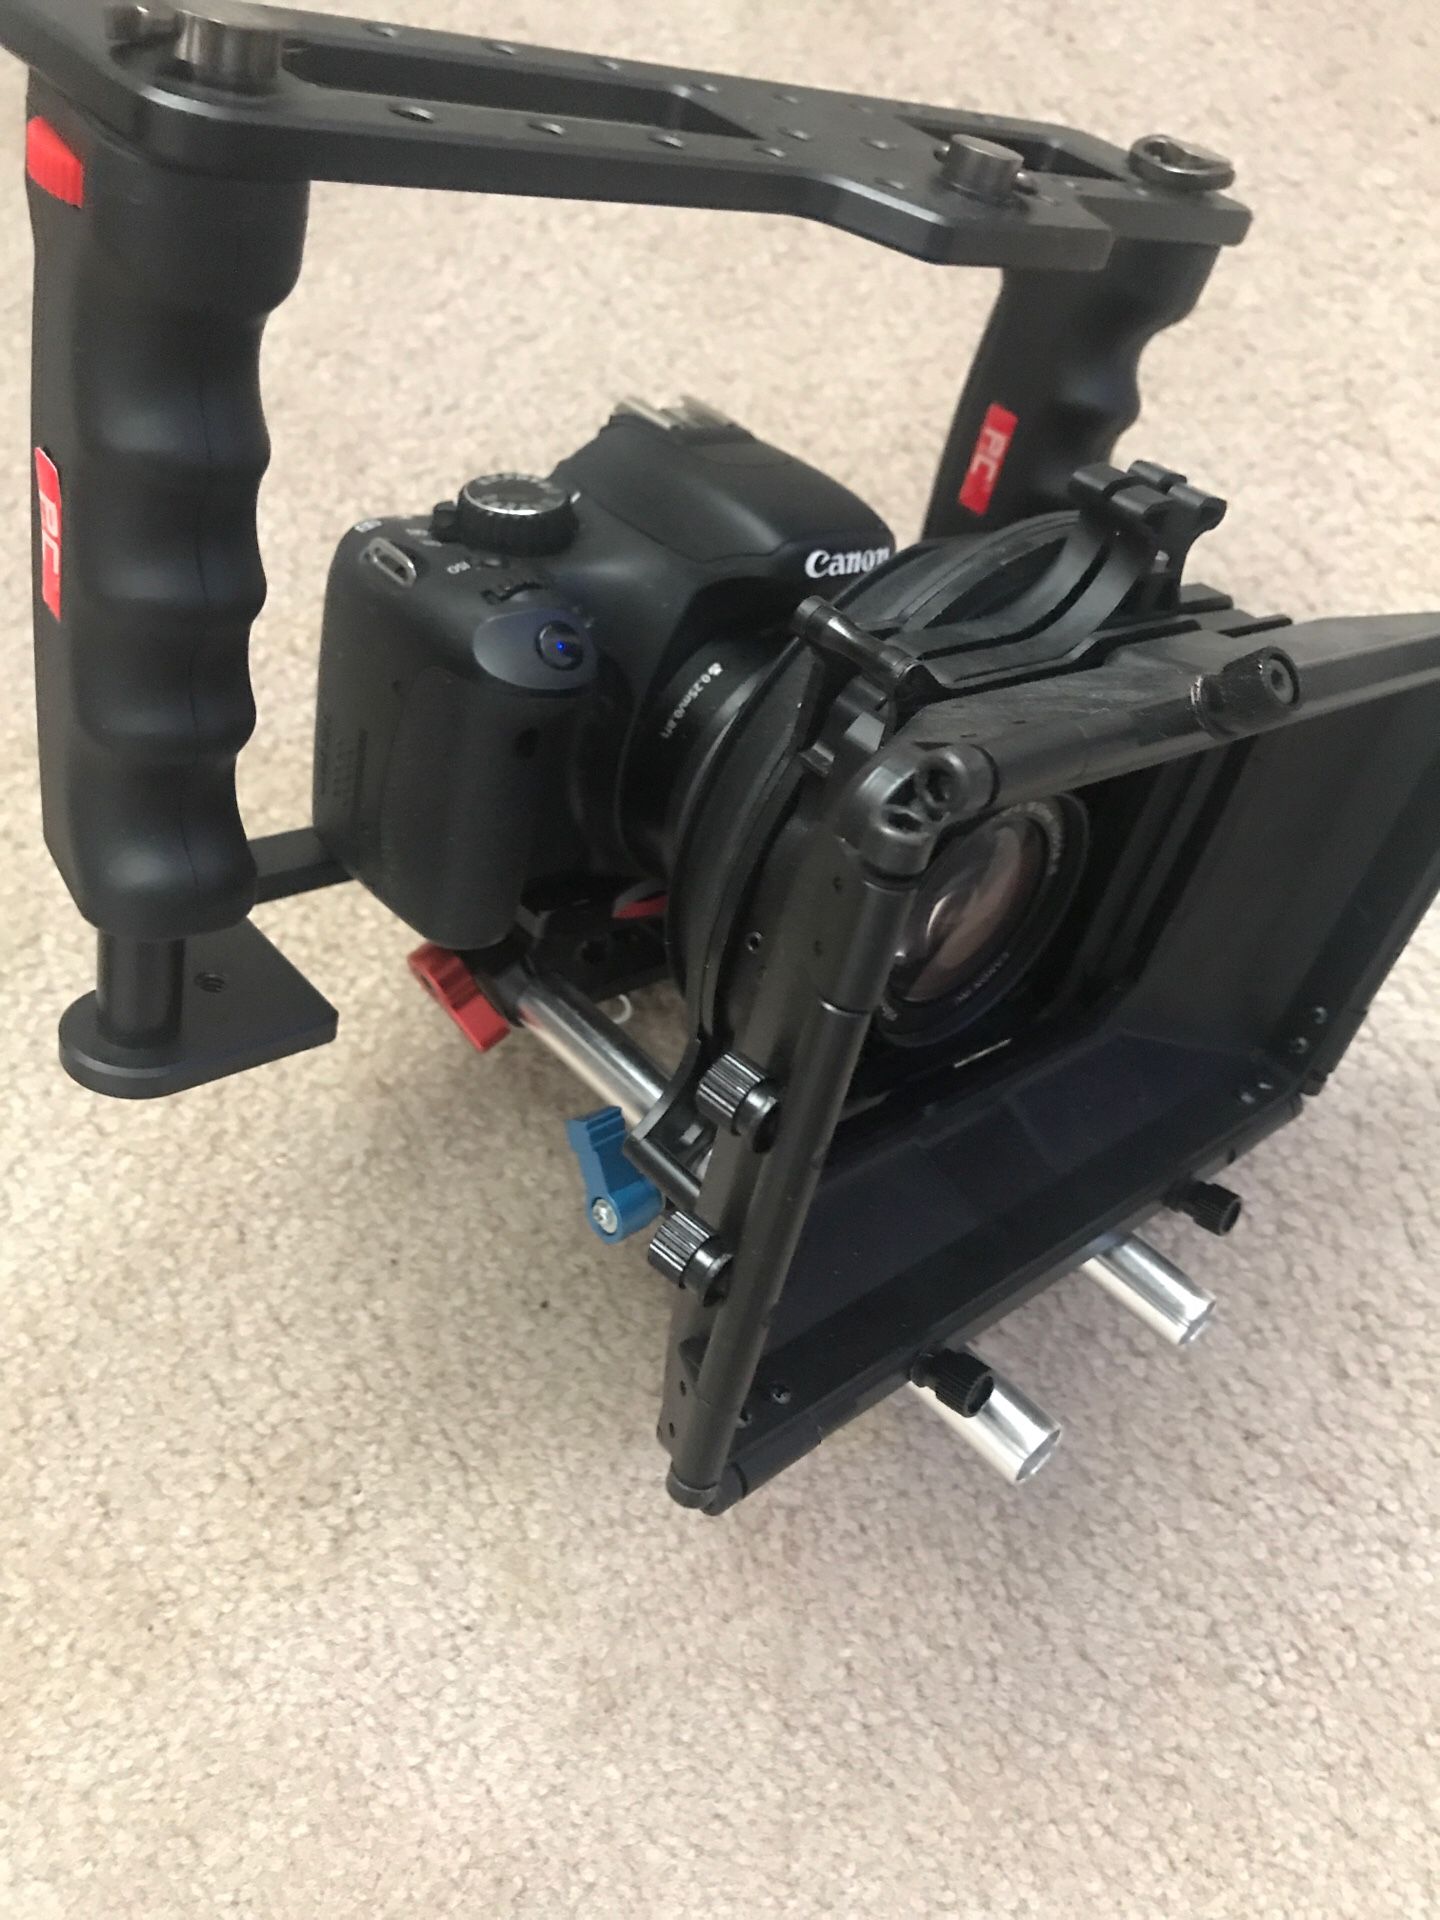 Canon t2i with Video rig (great for pictures or videos